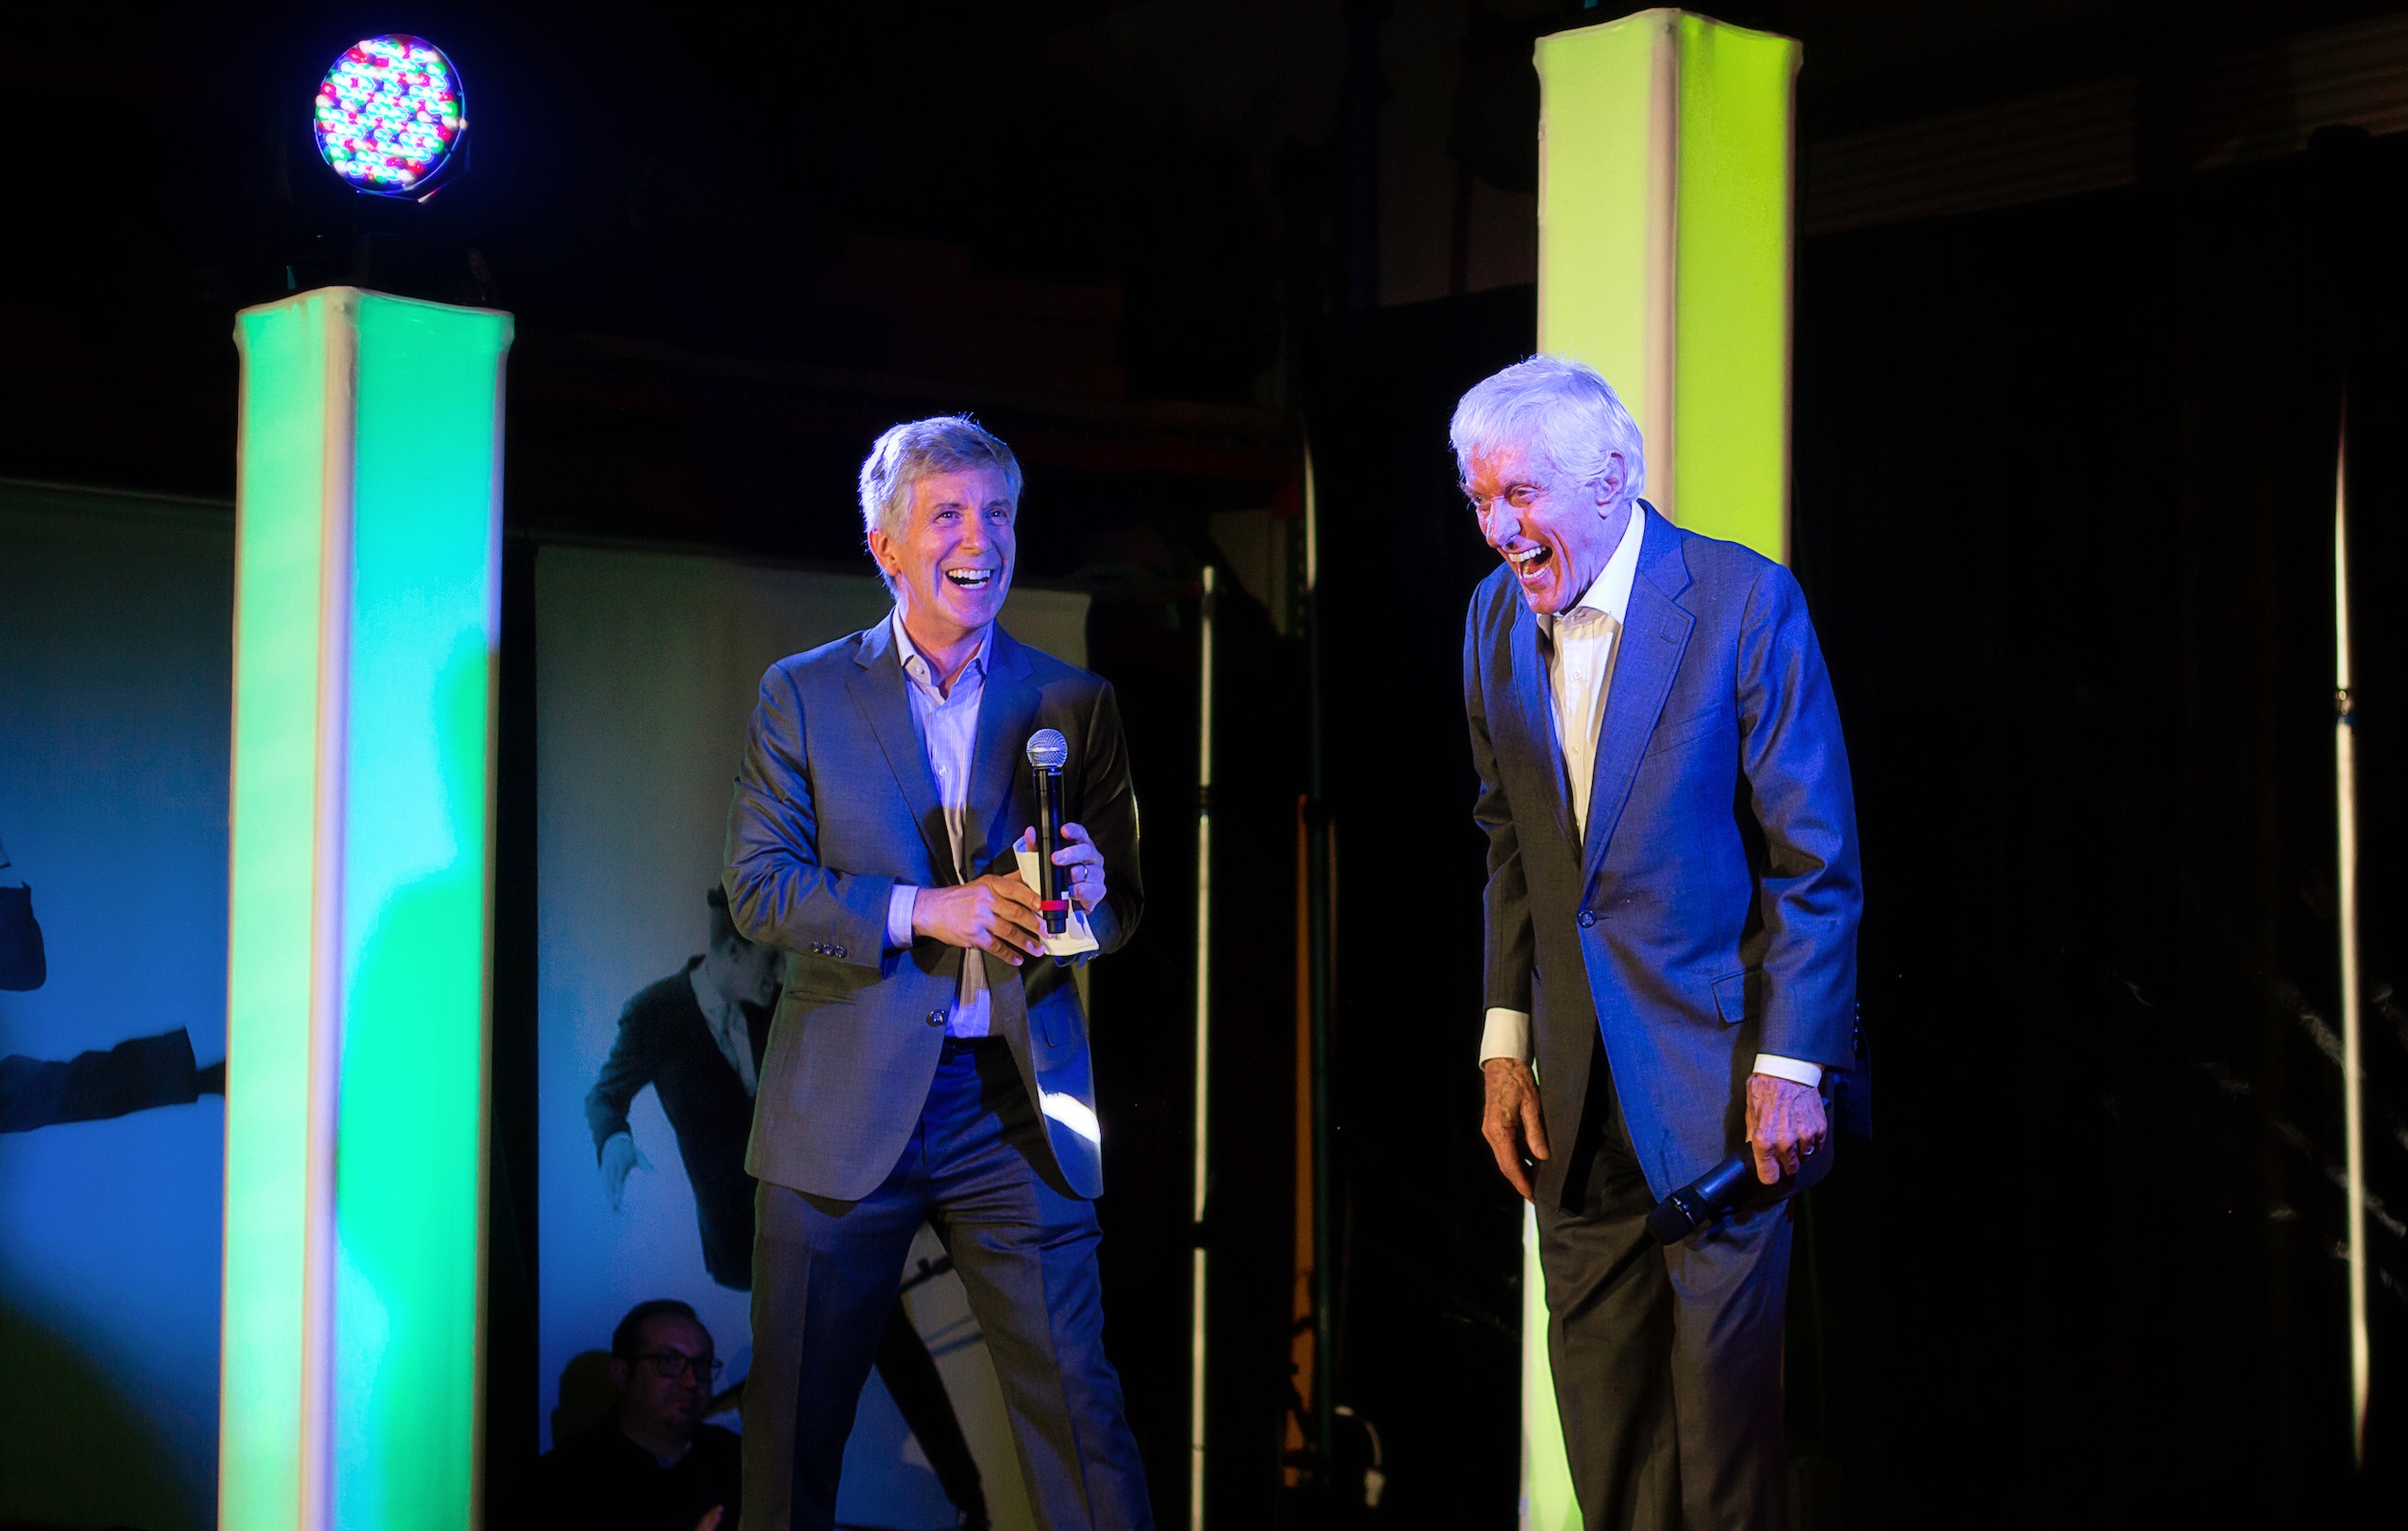 Tom Bergeron (L) and Dick Van Dyke share a laugh (photo by Laura Johansen/Alaura Imagery and Design)